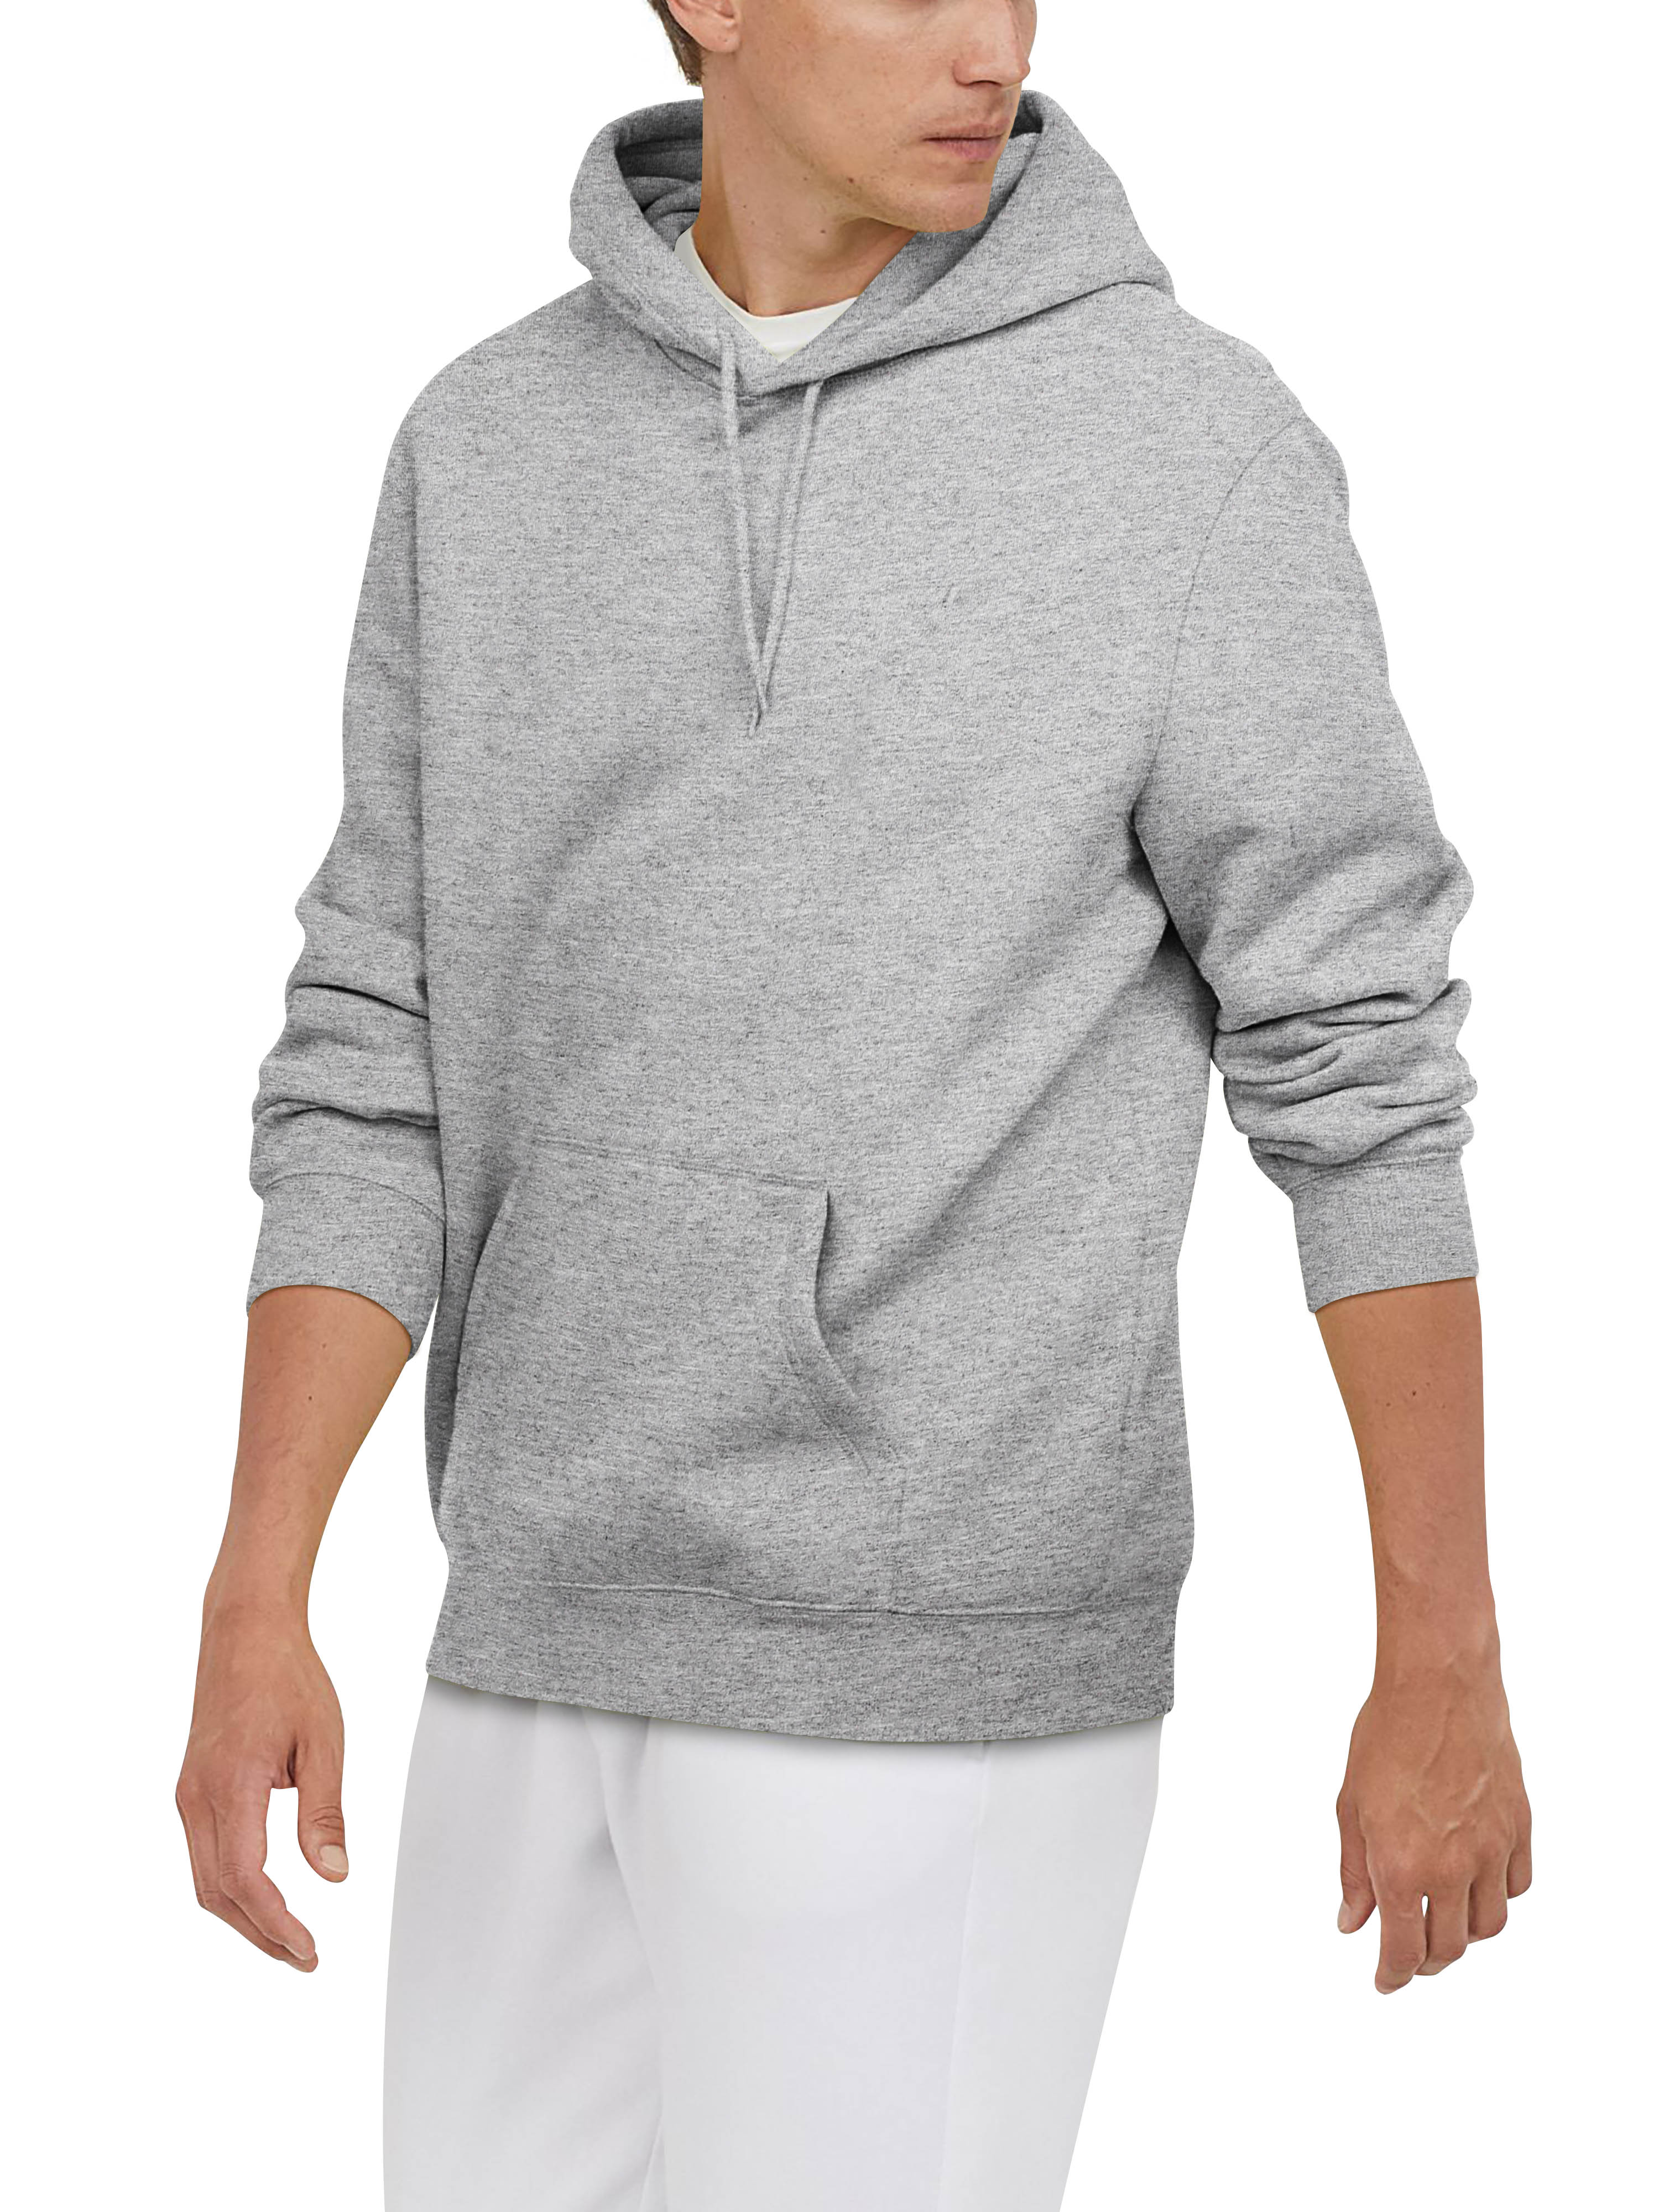 Ma Croix Mens Pullover Hoodie Ultra Soft Fleece Lined Cotton Hooded Sweatshirt With Lycra Ribbing For Performance - image 1 of 6